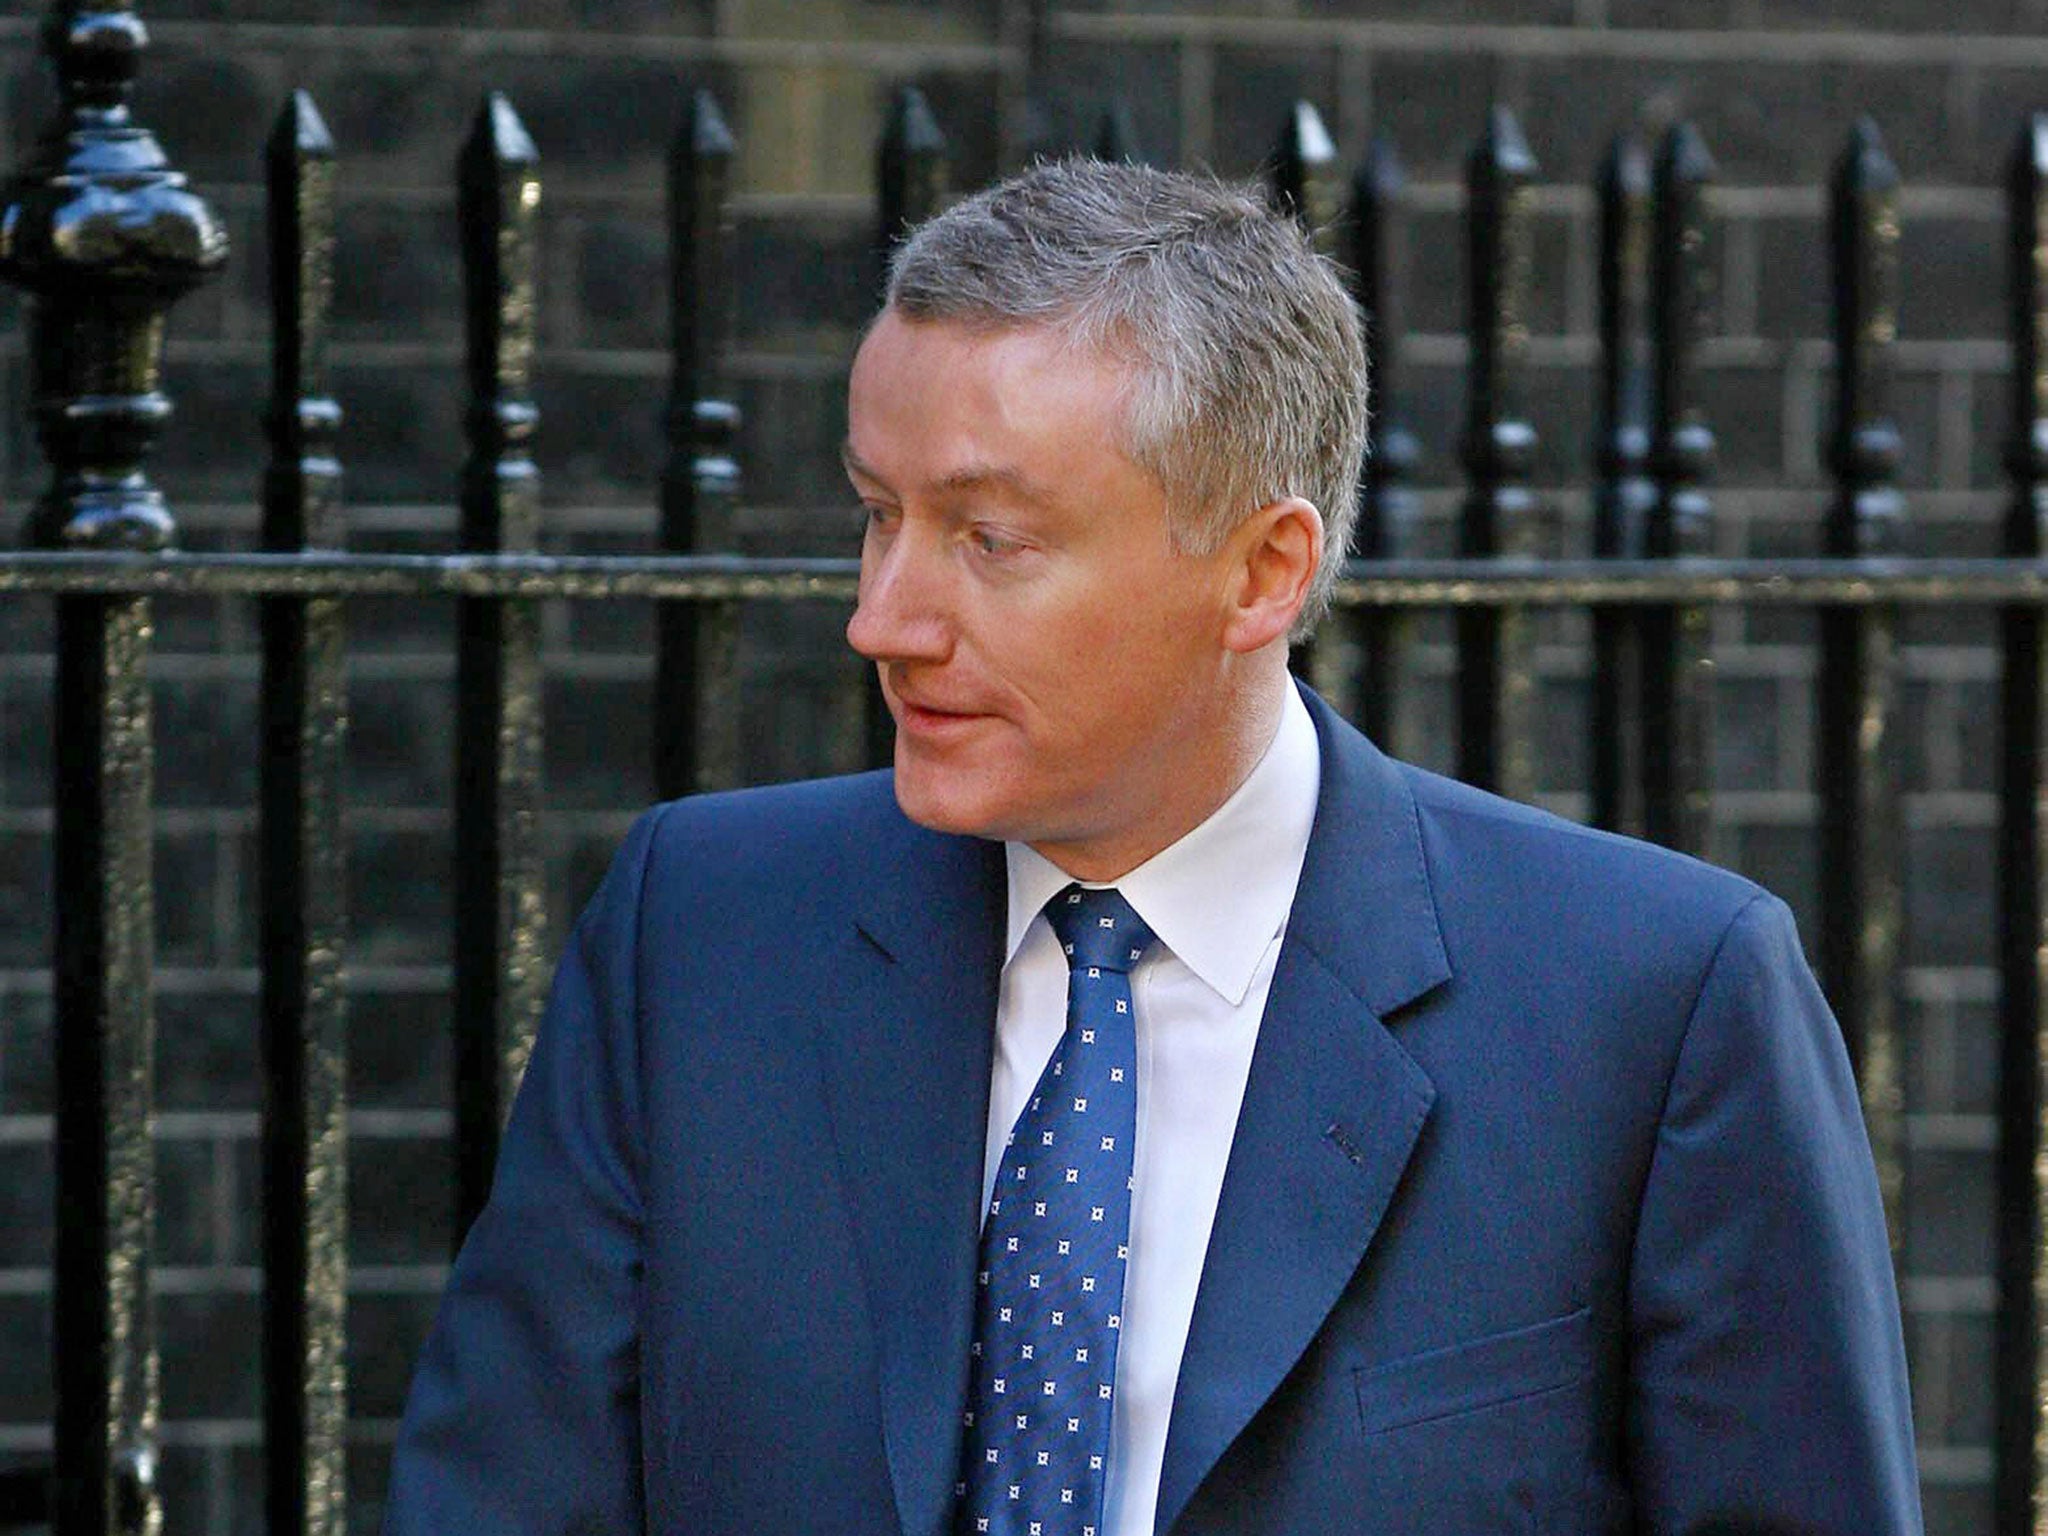 The former RBS chief execiutive Fred Goodwin led the bank into disaster in 2008